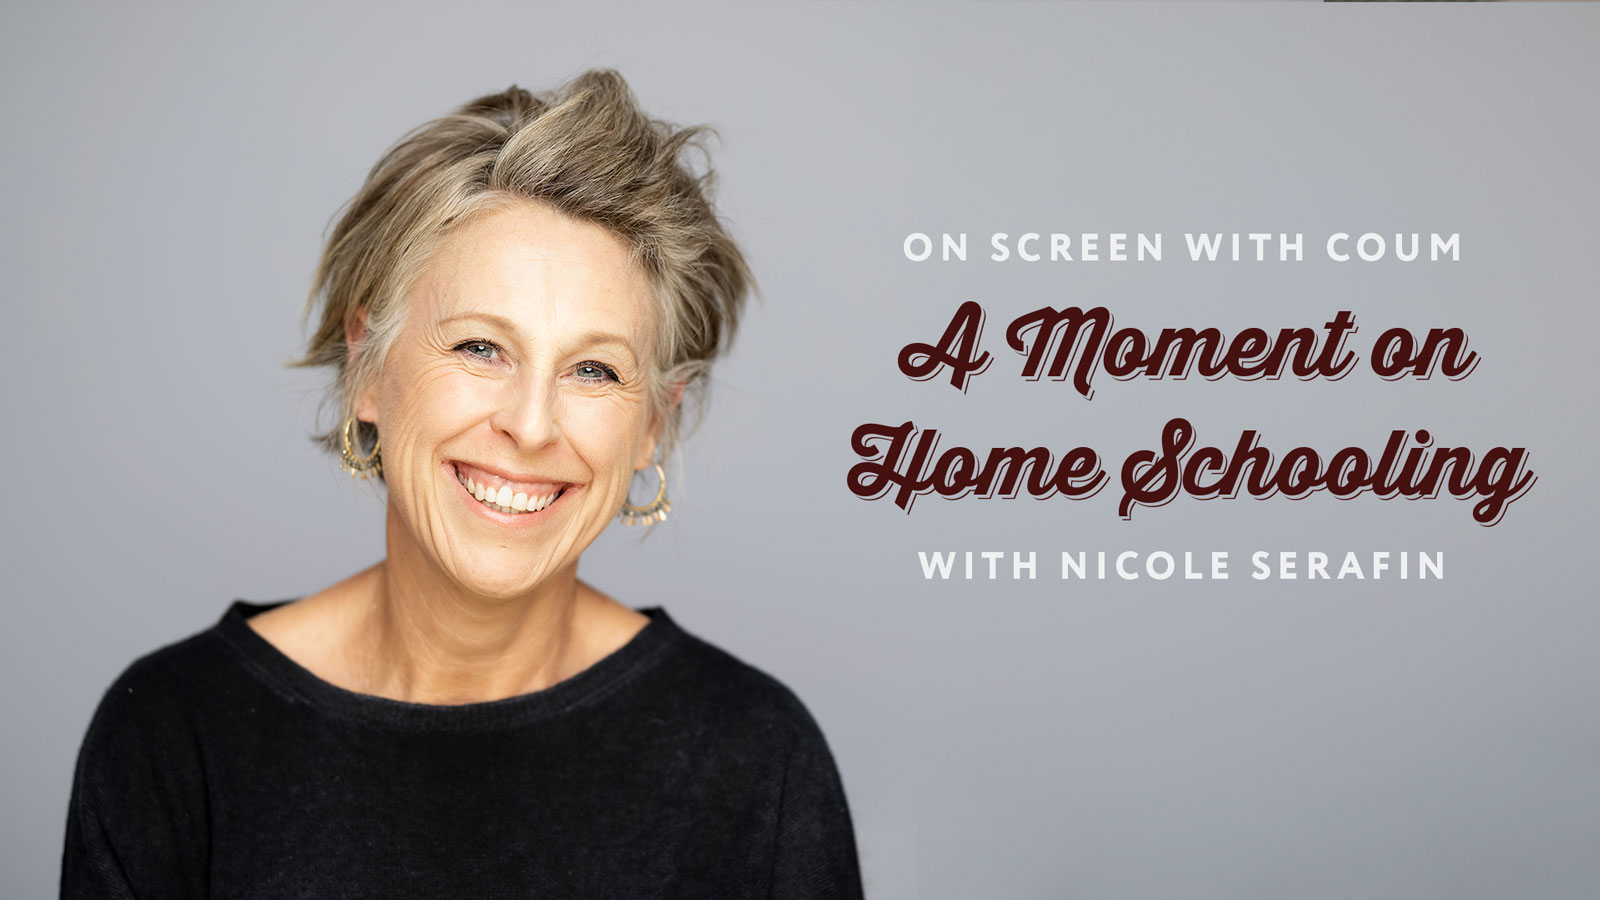 A moment on Home Schooling with Nicole Serafin